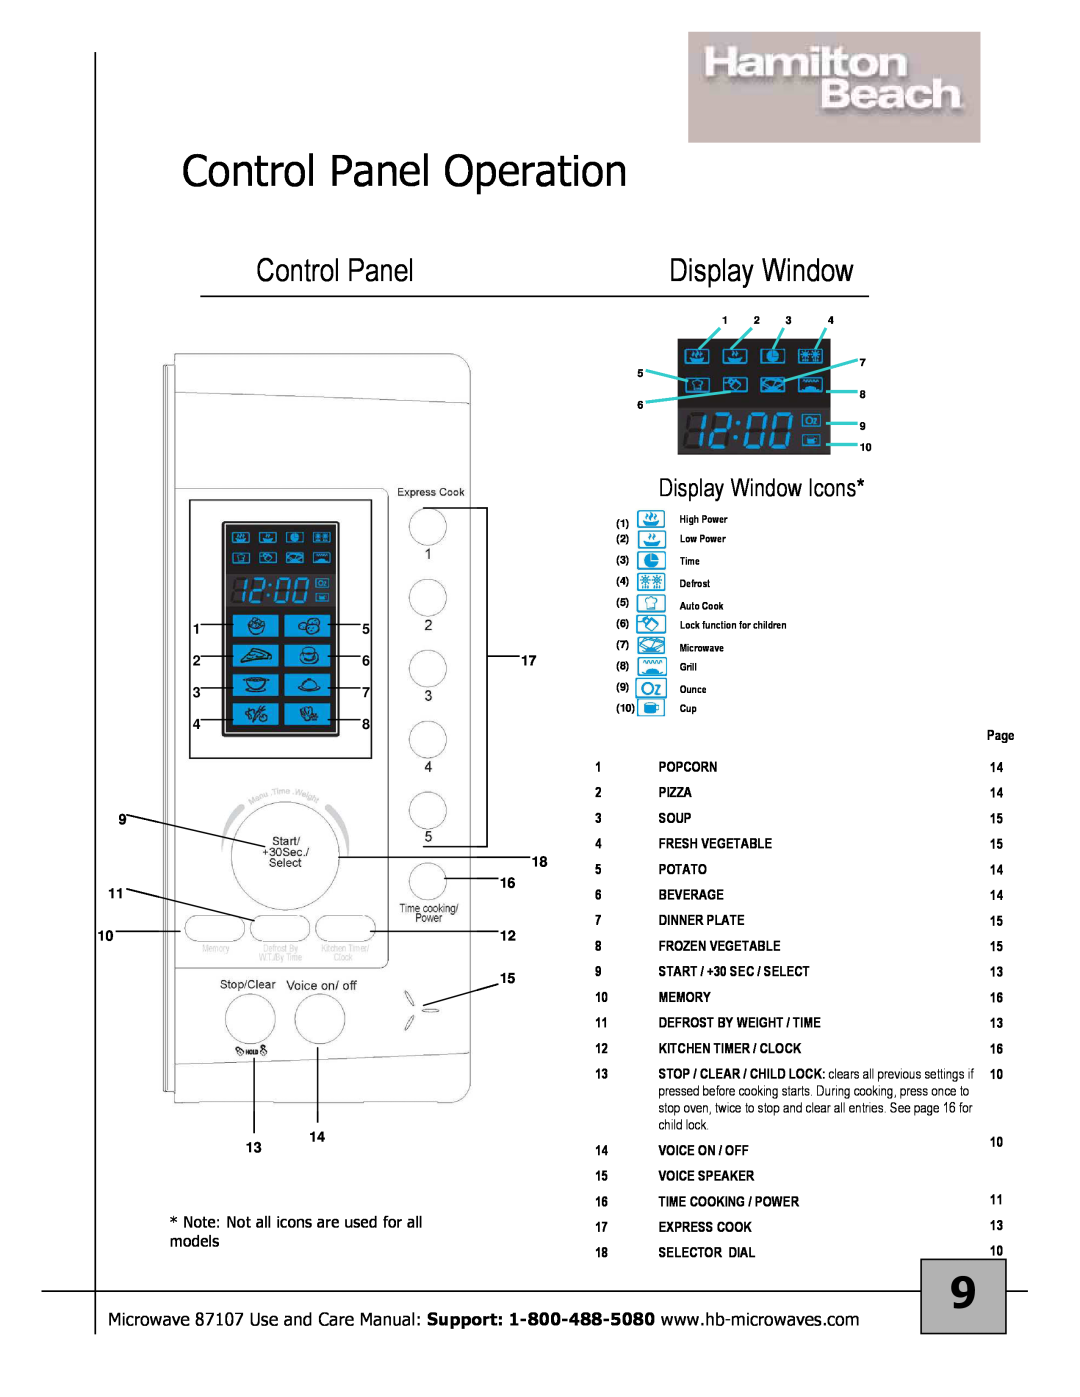 Hamilton Beach 87107 owner manual Control Panel Operation, Display Window Icons, models 